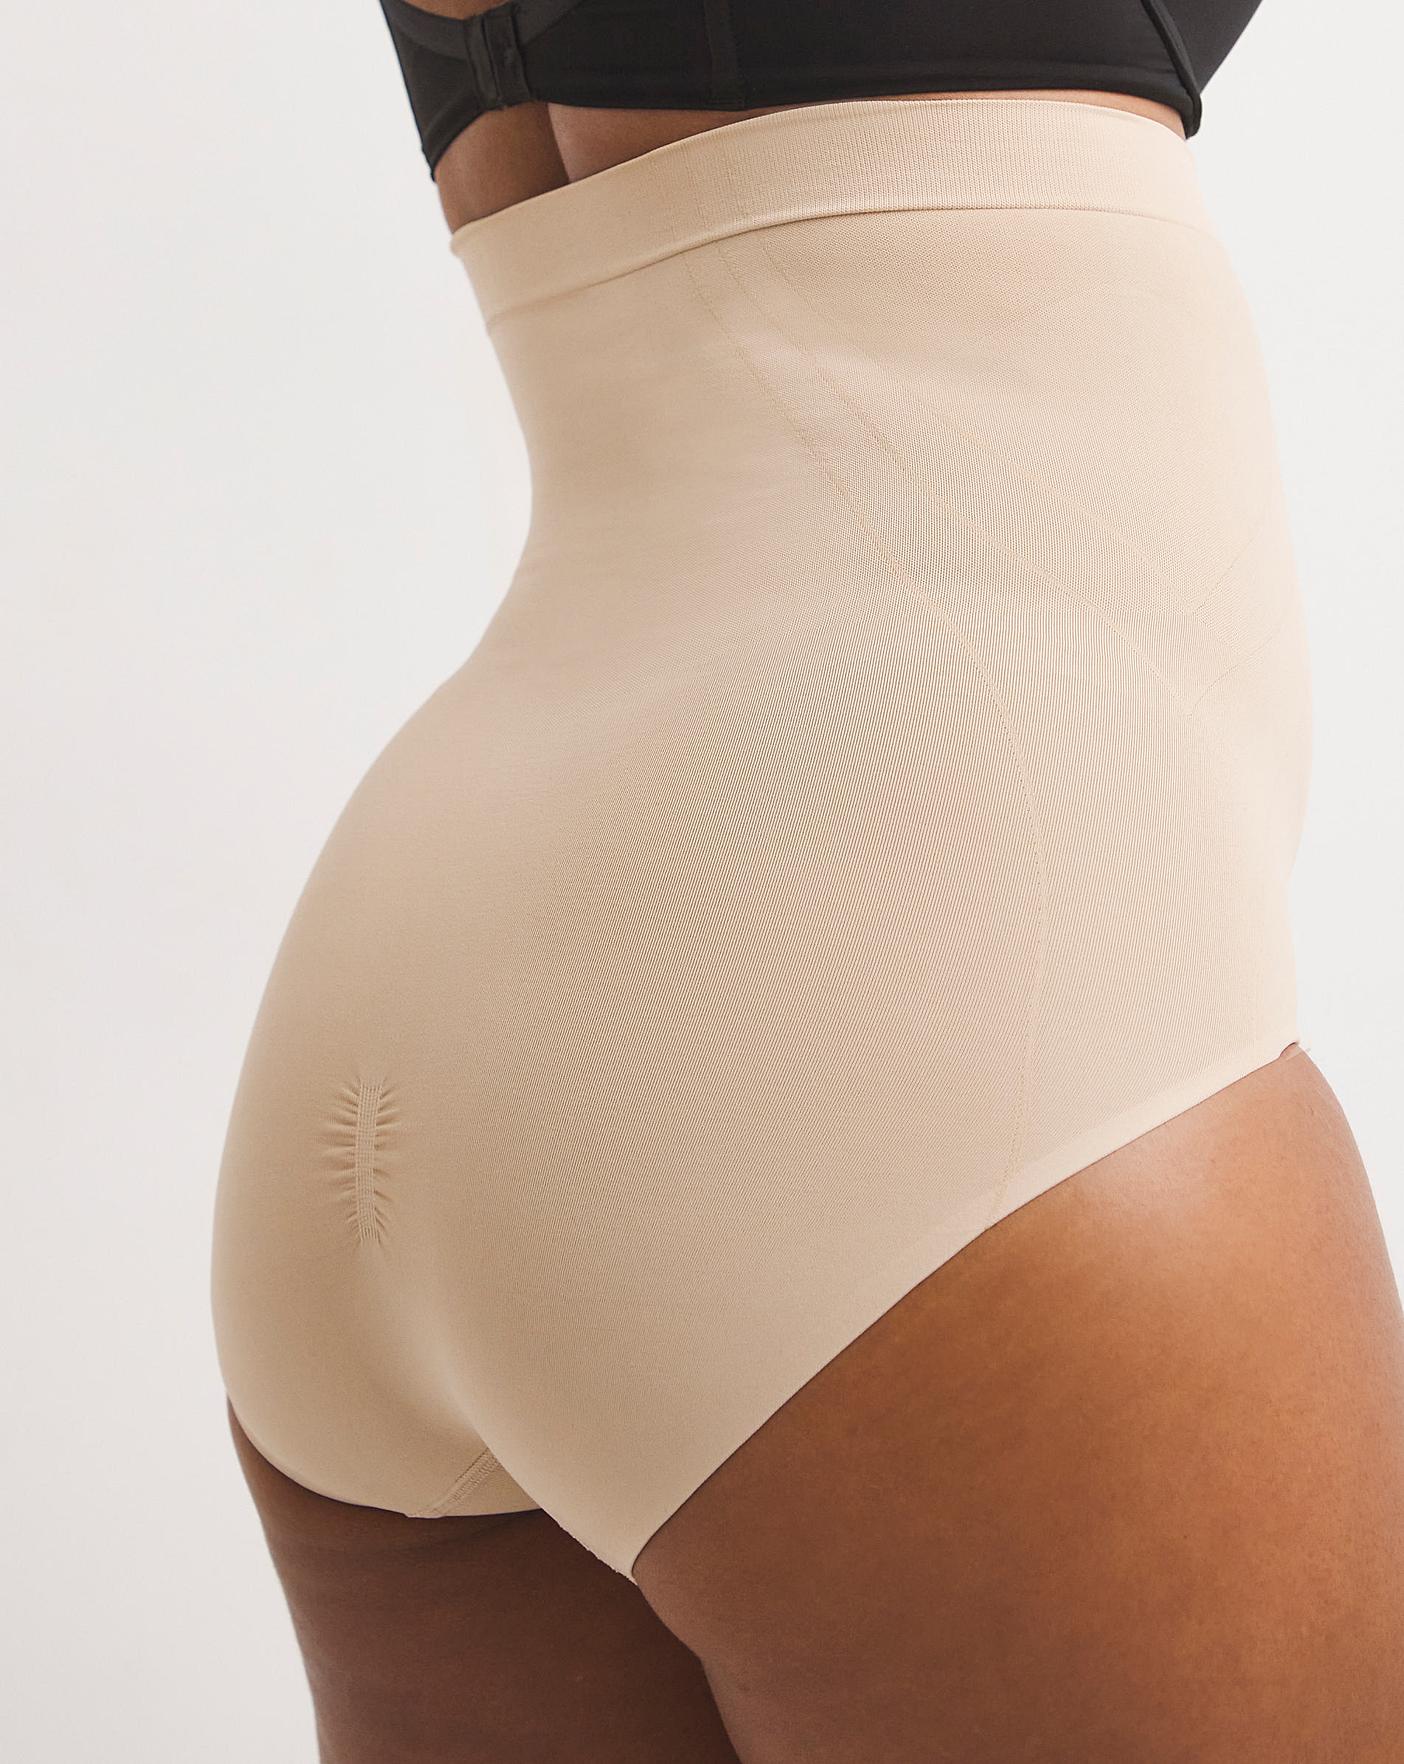 Recycled high waist knickers, everyday support Maidenform